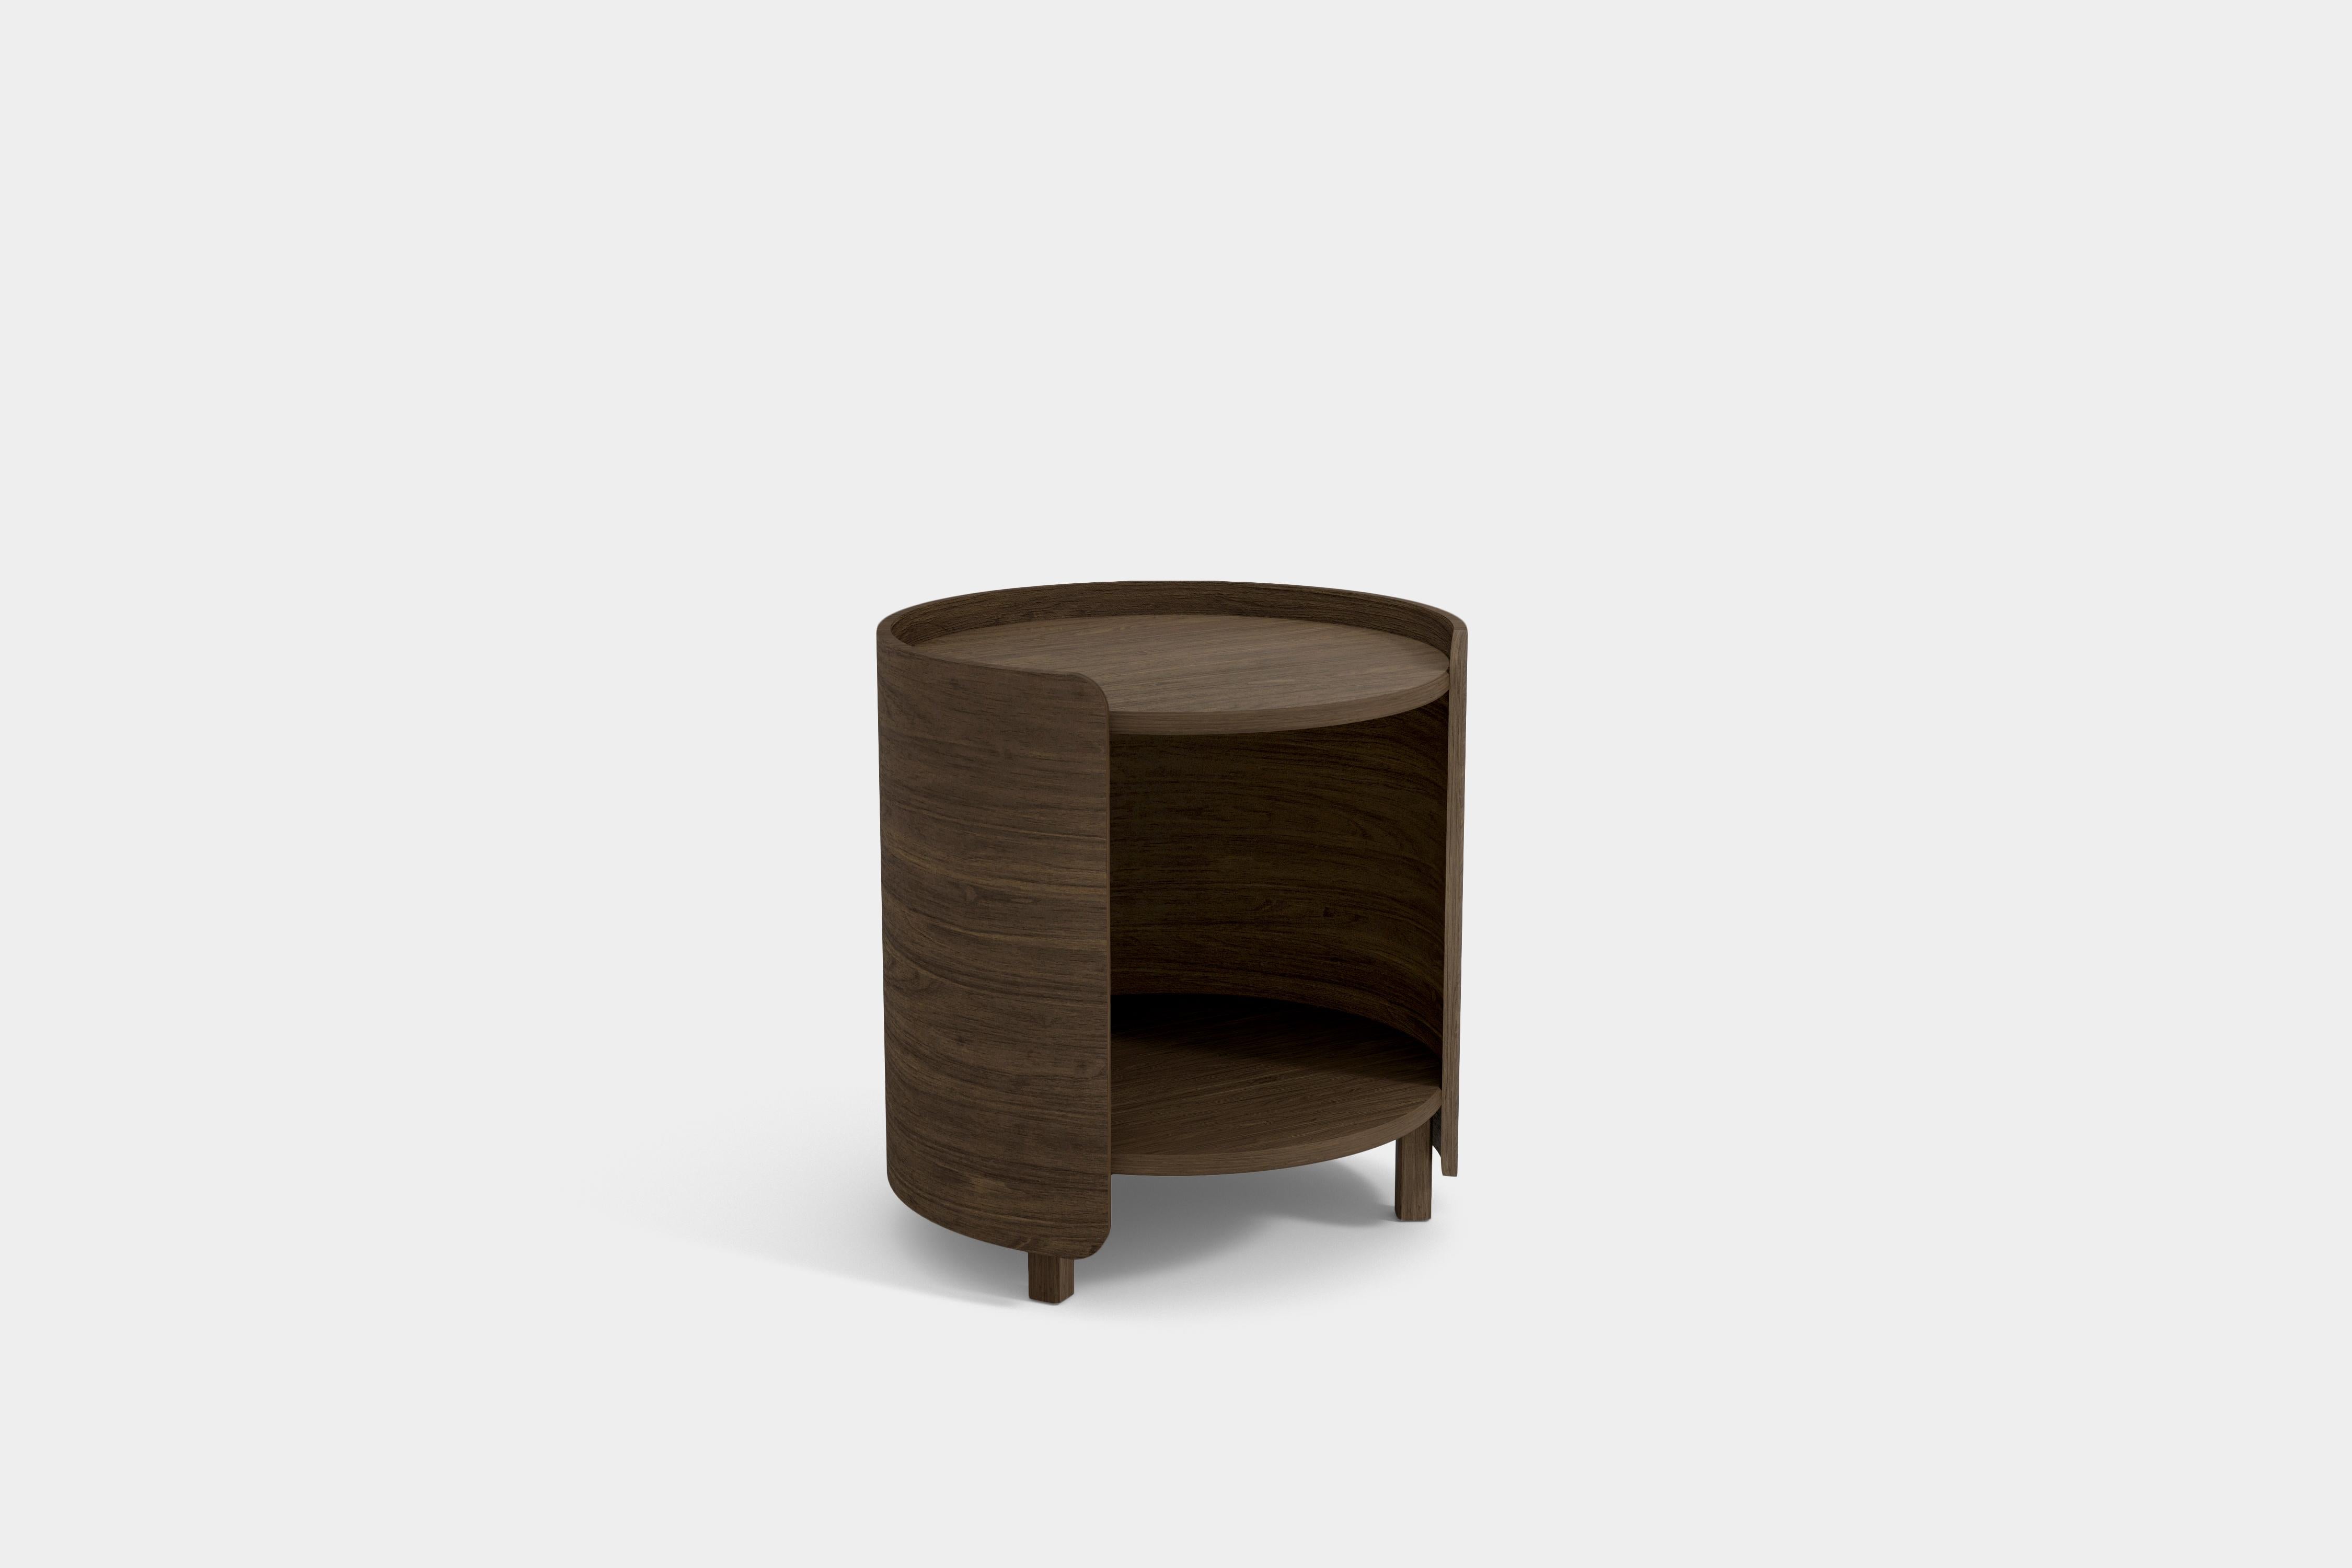 Prima Side Table, Night Stand in Walnut Wood Finish by Joel Escalona

Prima Collection is born under the idea of creating fundamental pieces for the home, those that you simply cannot imagine your space without.

Prima side table will bring grace